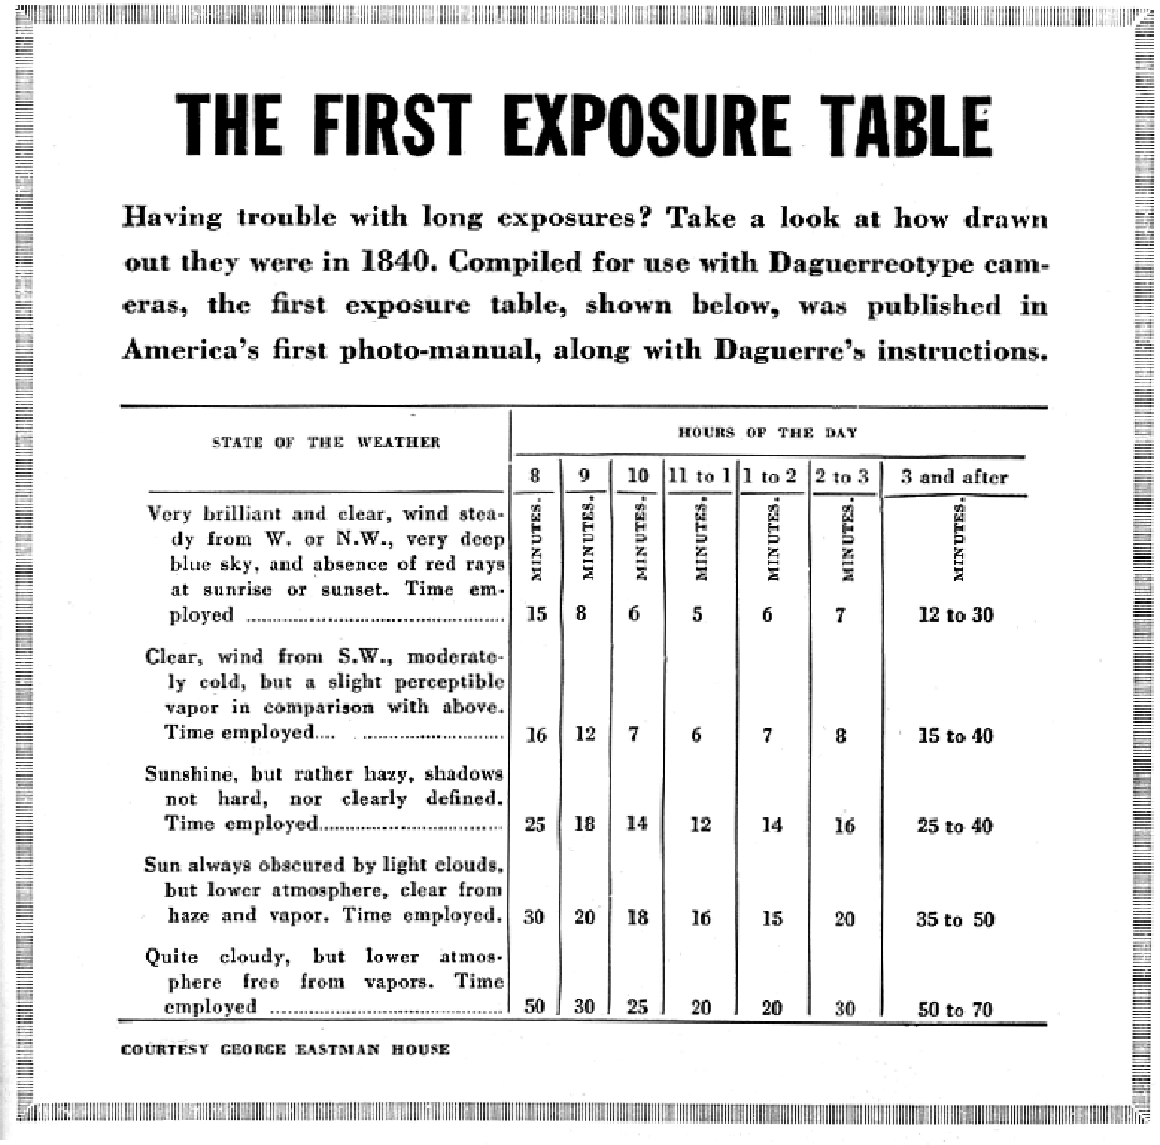 THE FIRST EXPOSURE TABLE